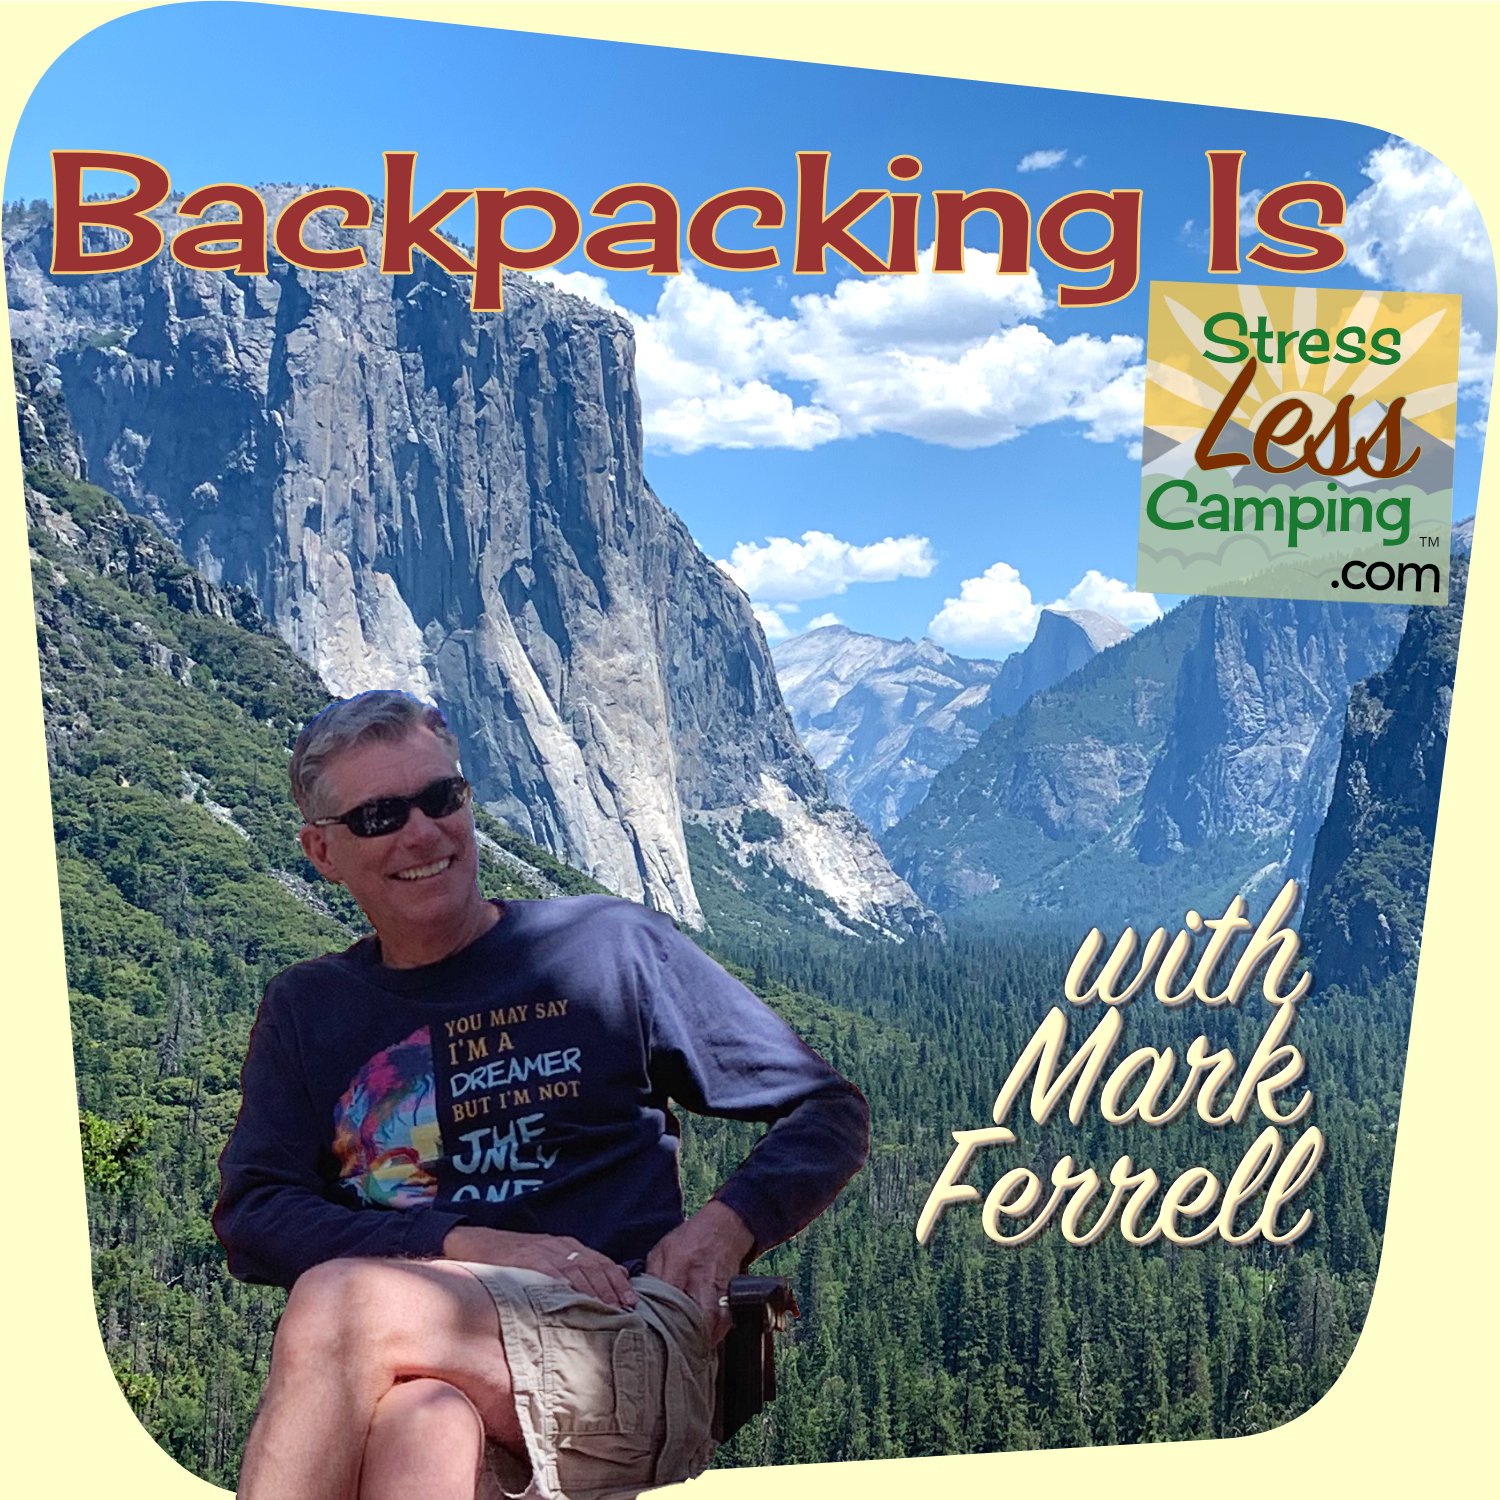 Backpacking is StressLess Camping